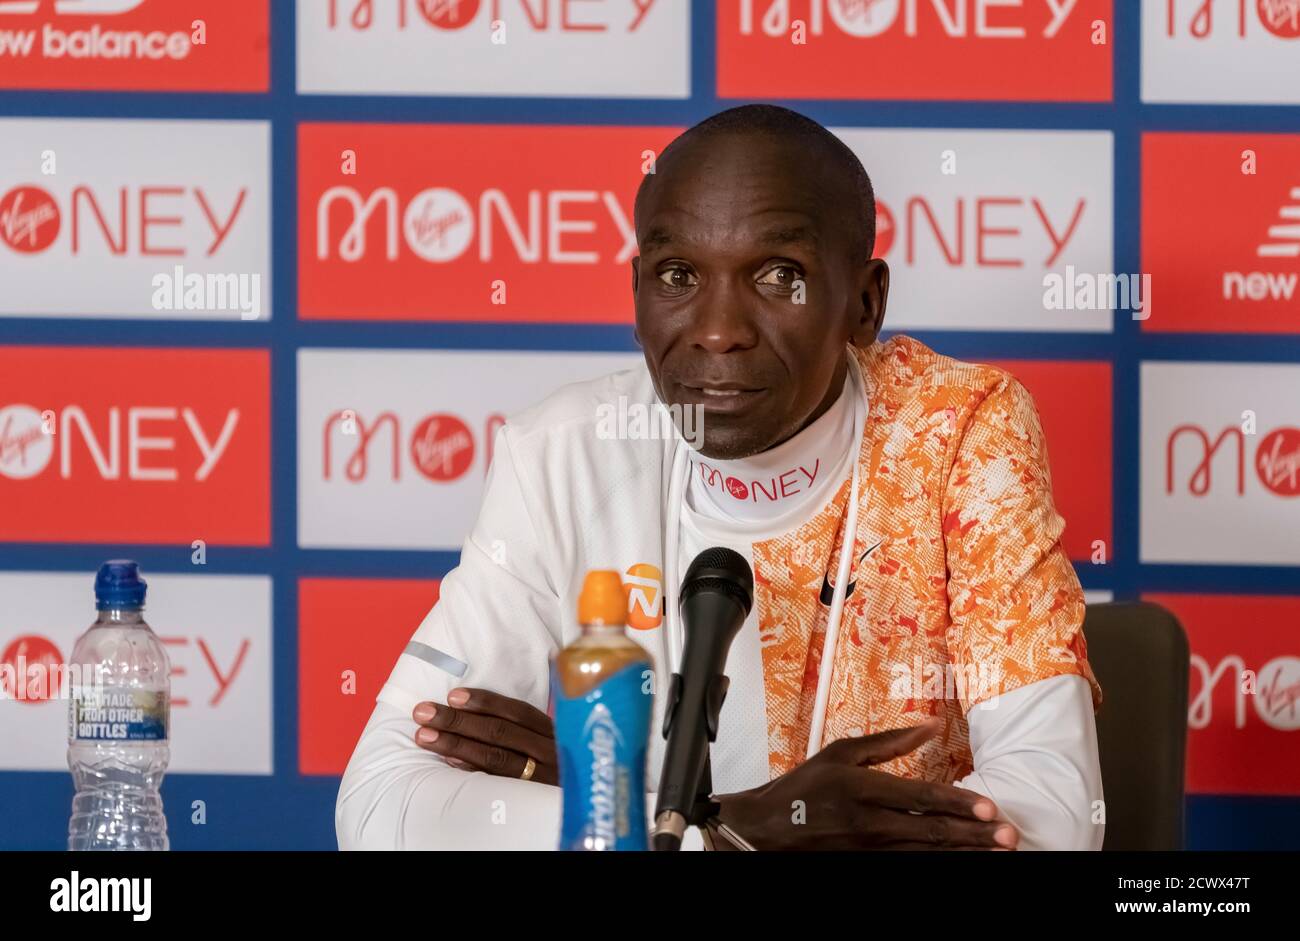 Kenya's Eliud Kipchoge speaks to the media via Zoom in a virtual and socially distanced press conference from inside the official hotel and biosecure bubble for the historic elite-only 2020 Virgin Money London Marathon on Sunday 4 October. The 40th Race will take place on a closed-loop circuit around St James's Park in central London. Stock Photo